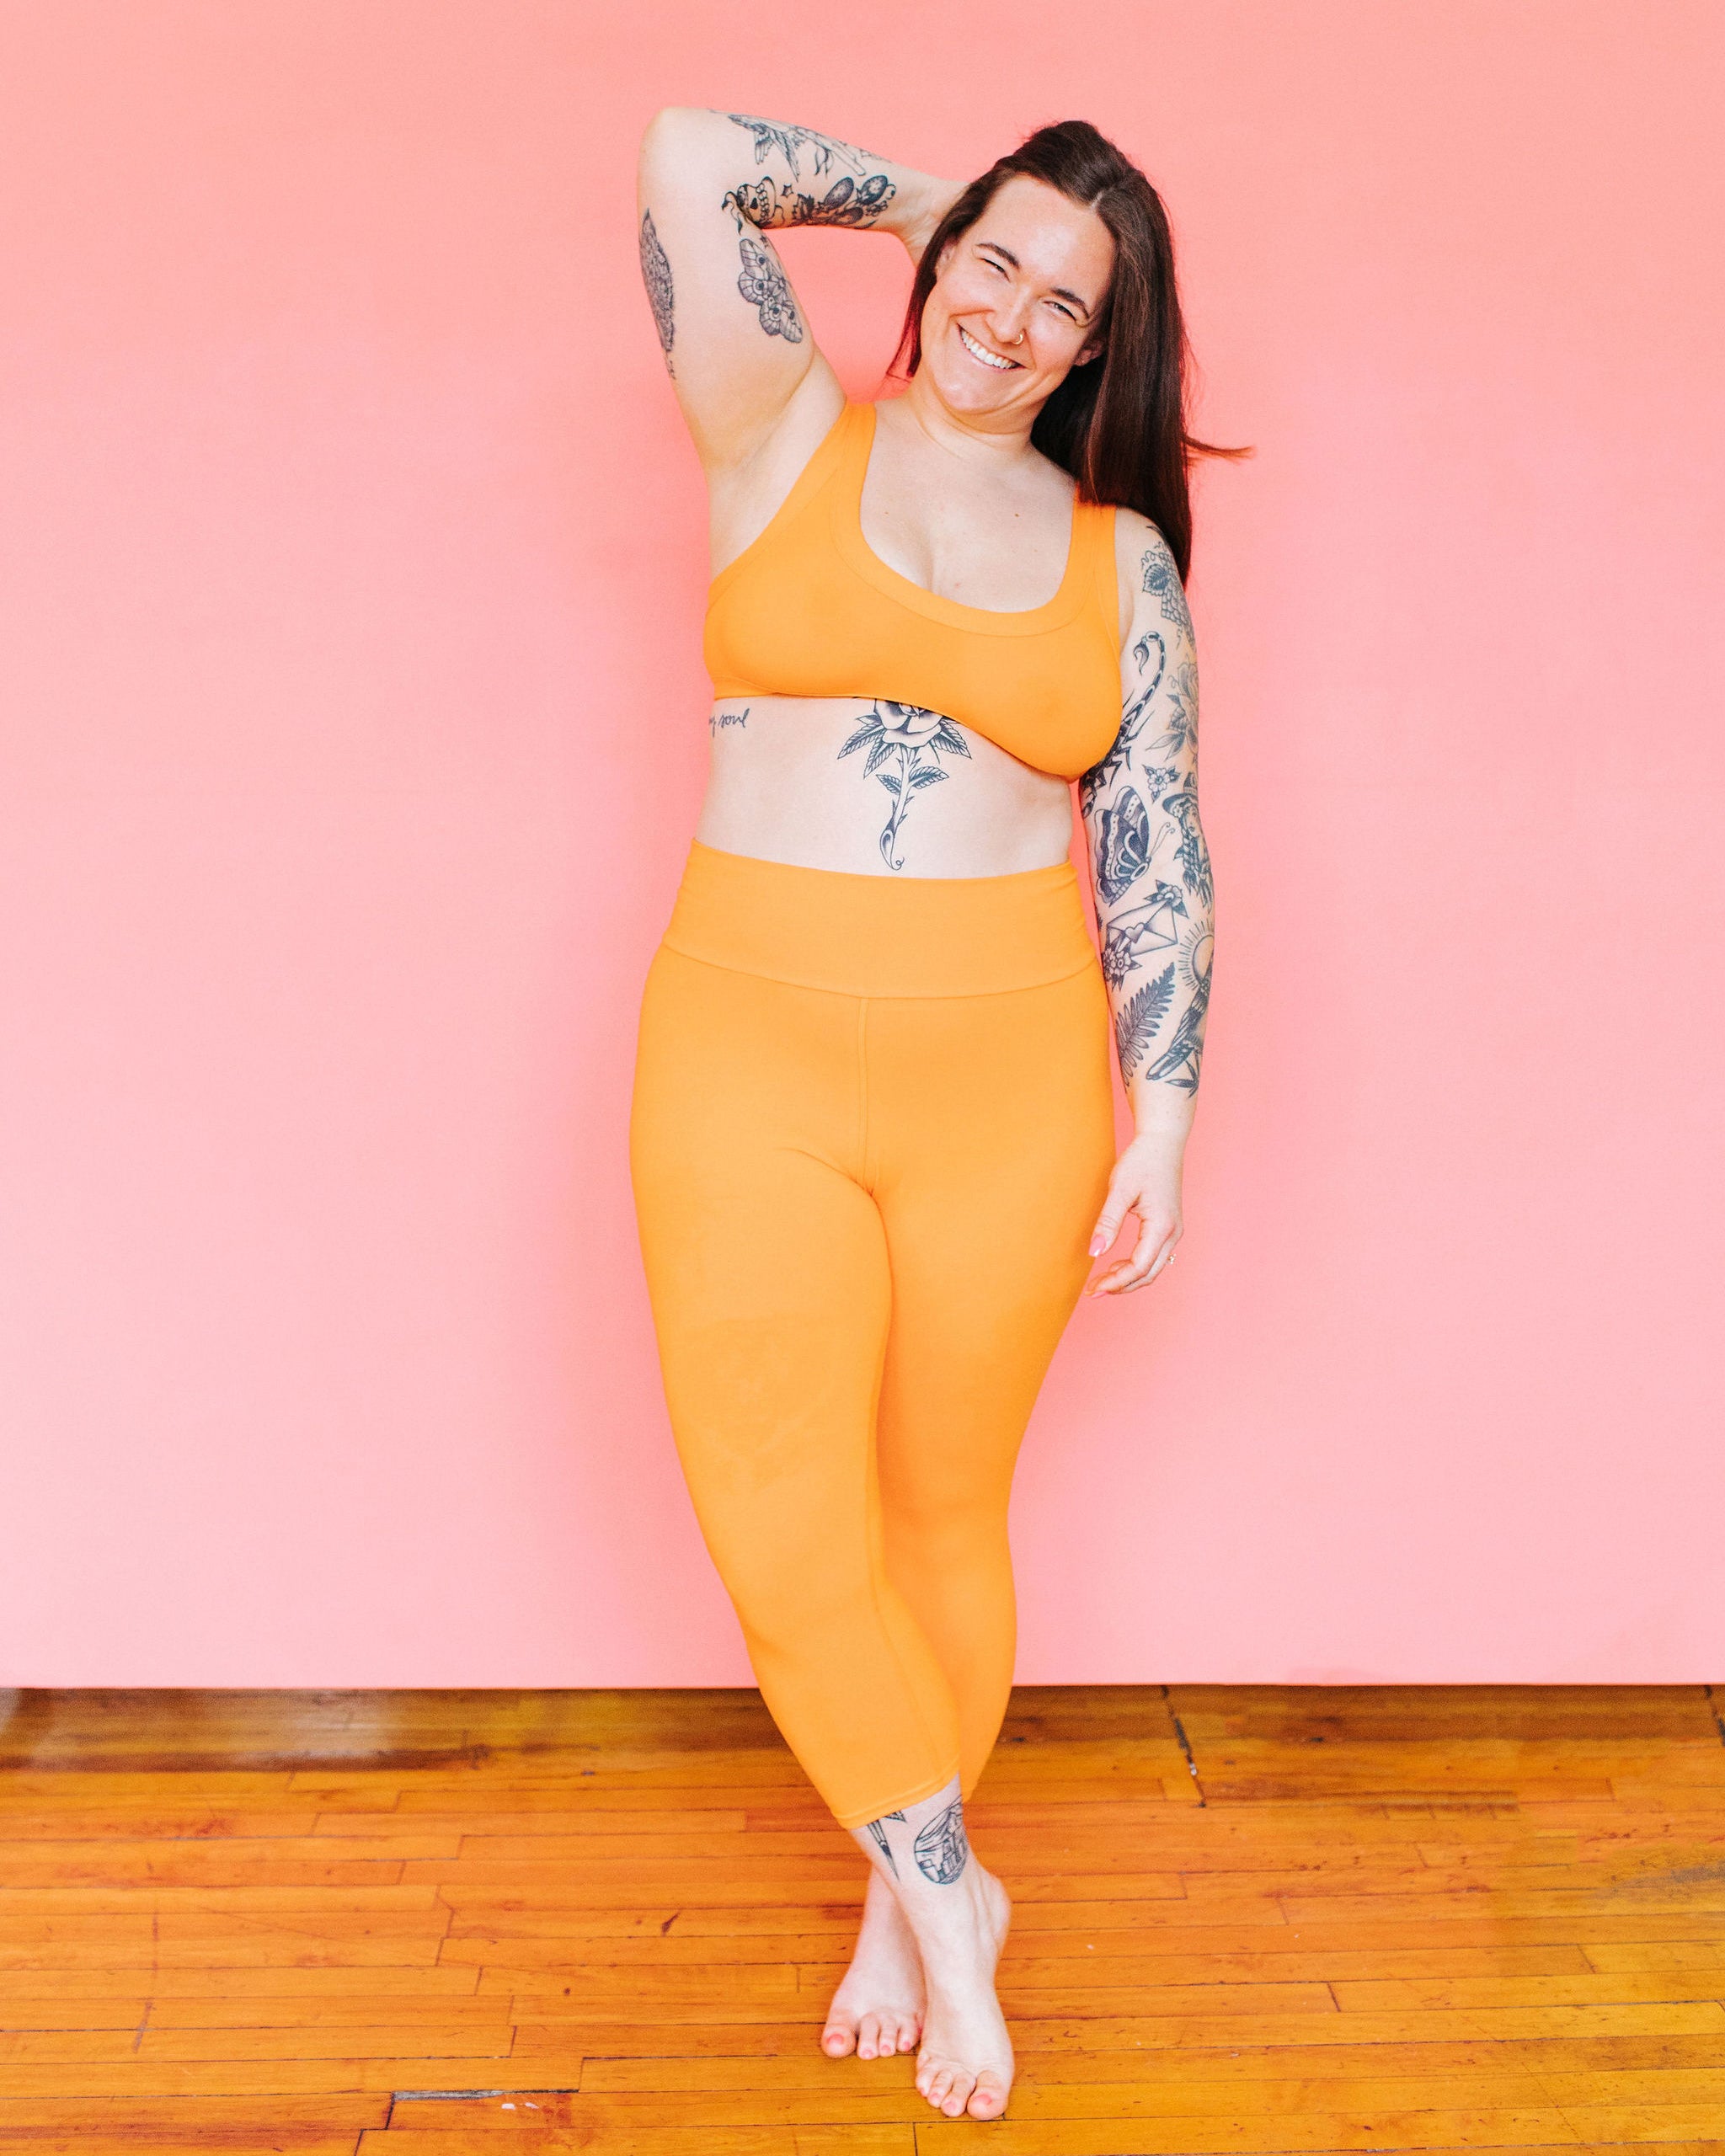 Model standing in front of a pink background wearing 3/4 Length Leggings and a Bralette in the orange color Oregon Sunstone.